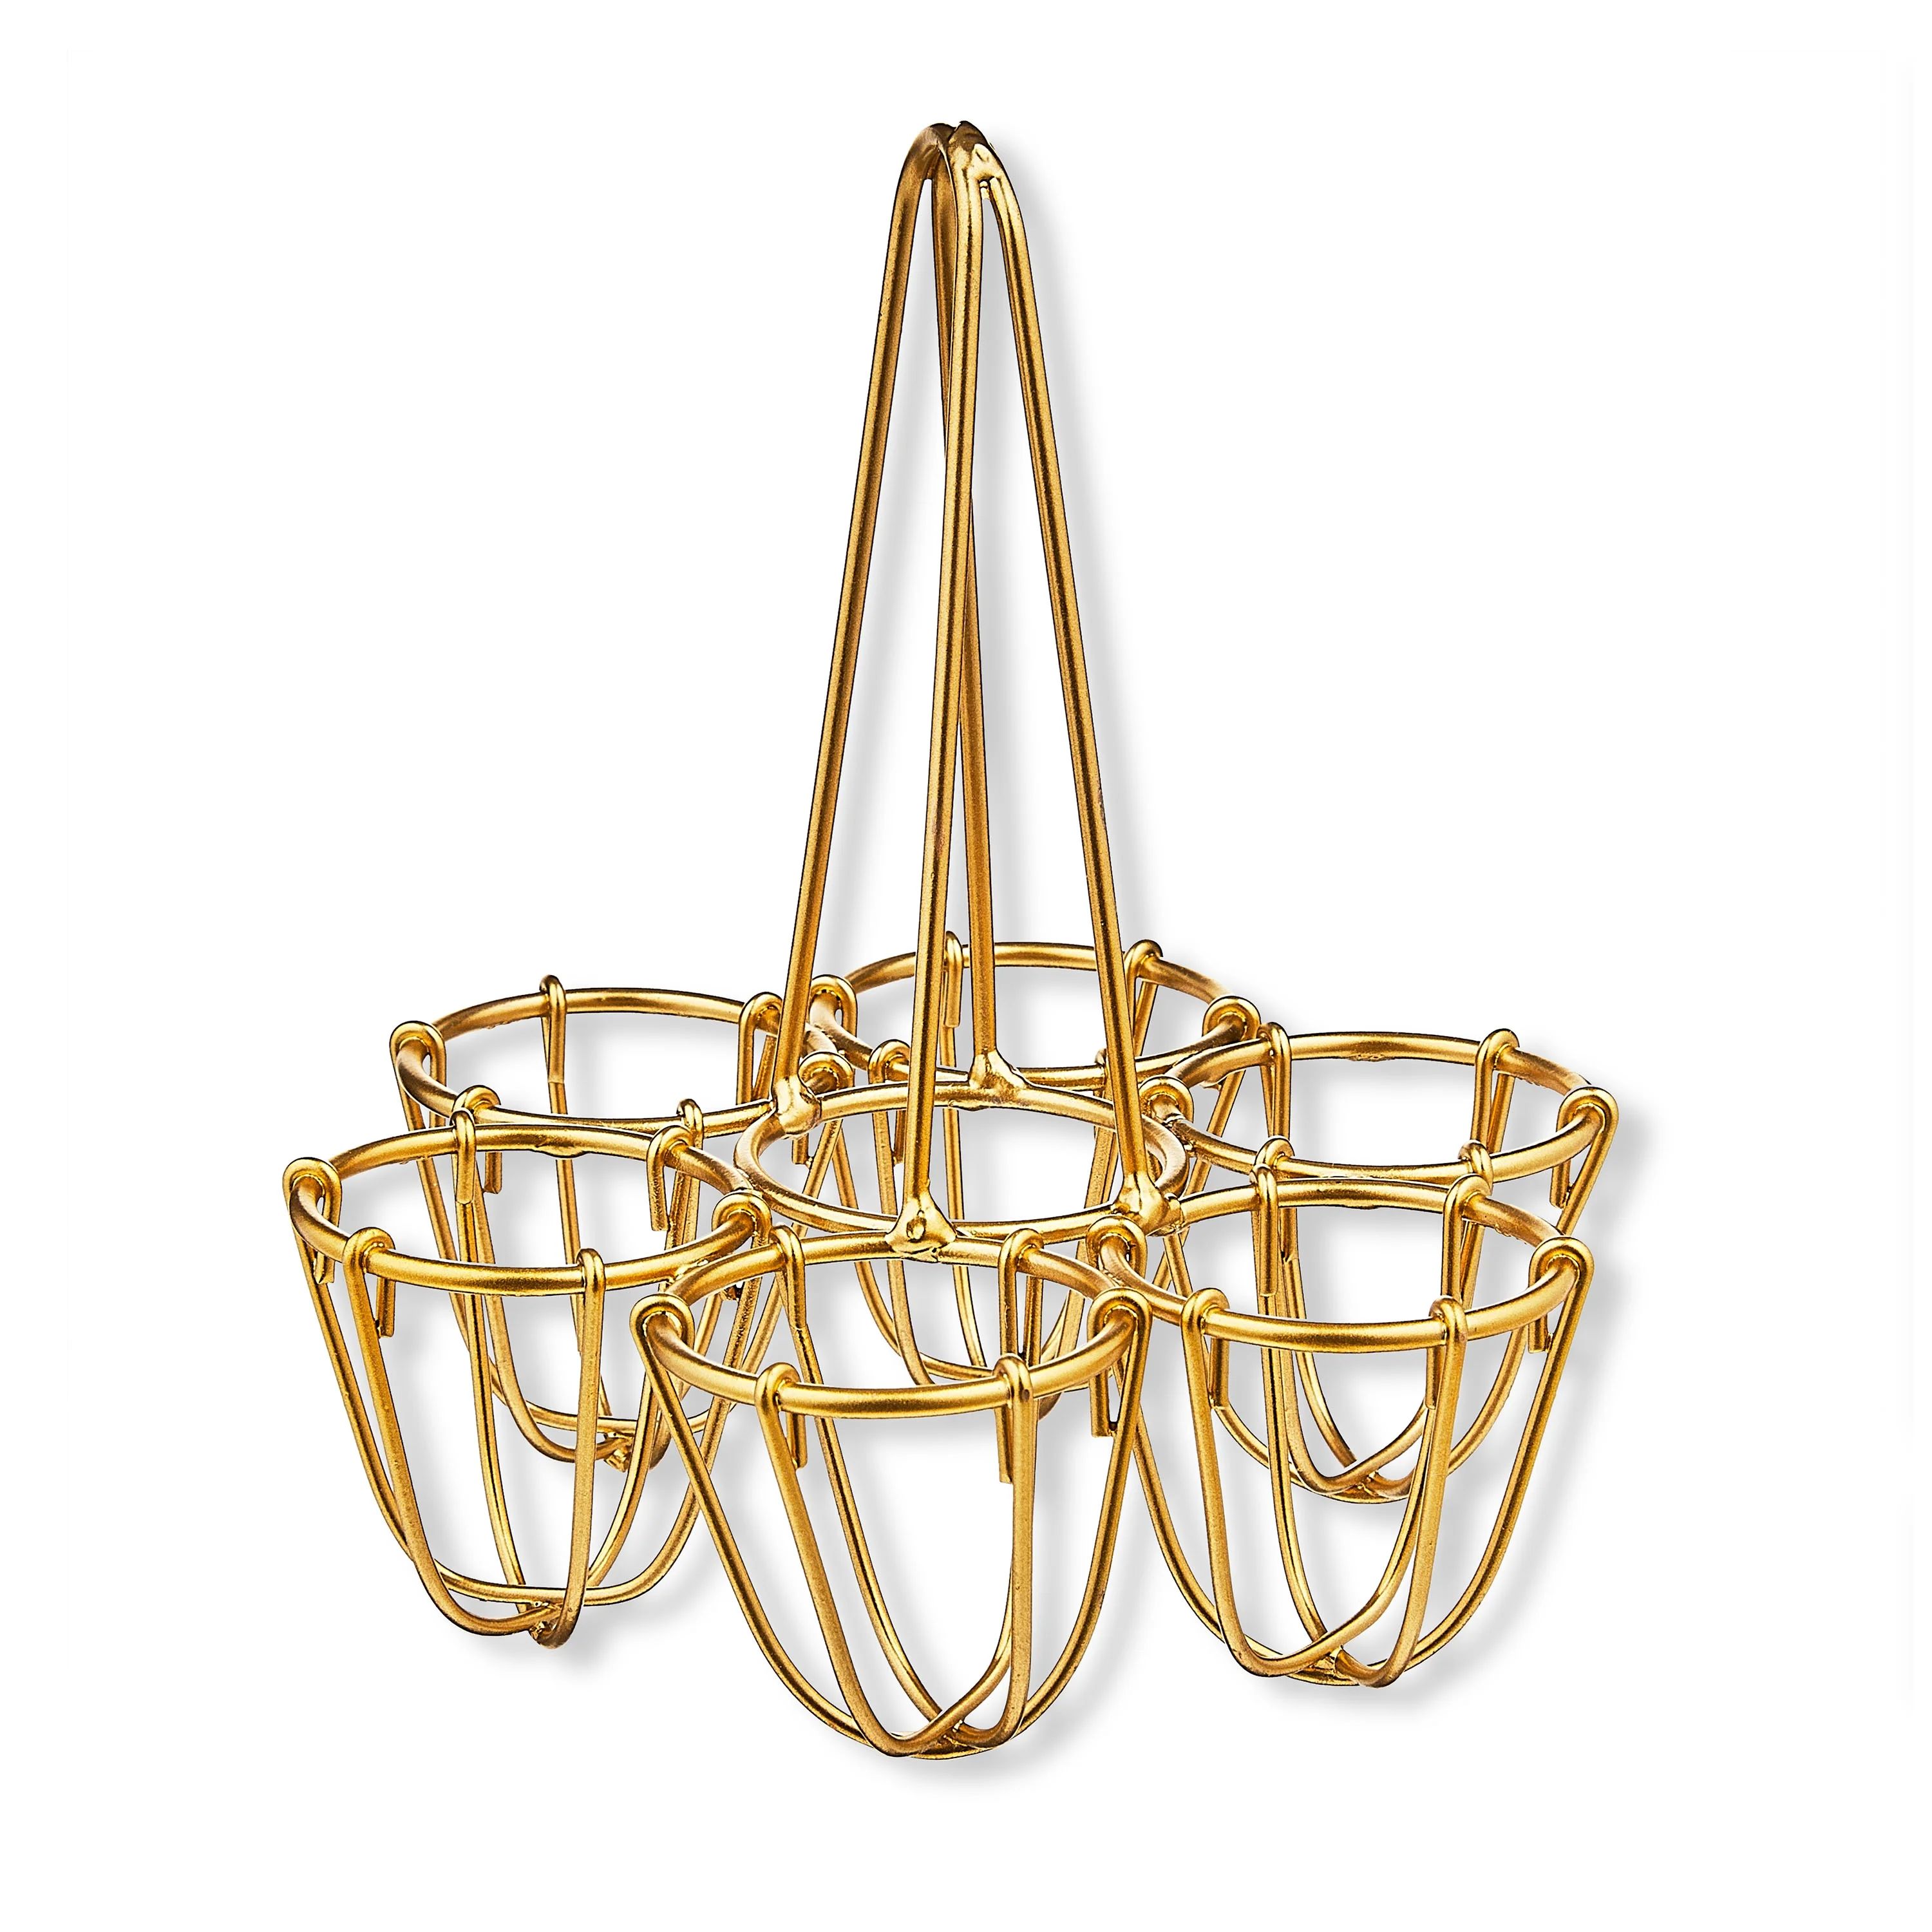 Easter Gold Metal Egg Holder, by Way To Celebrate | Walmart (US)